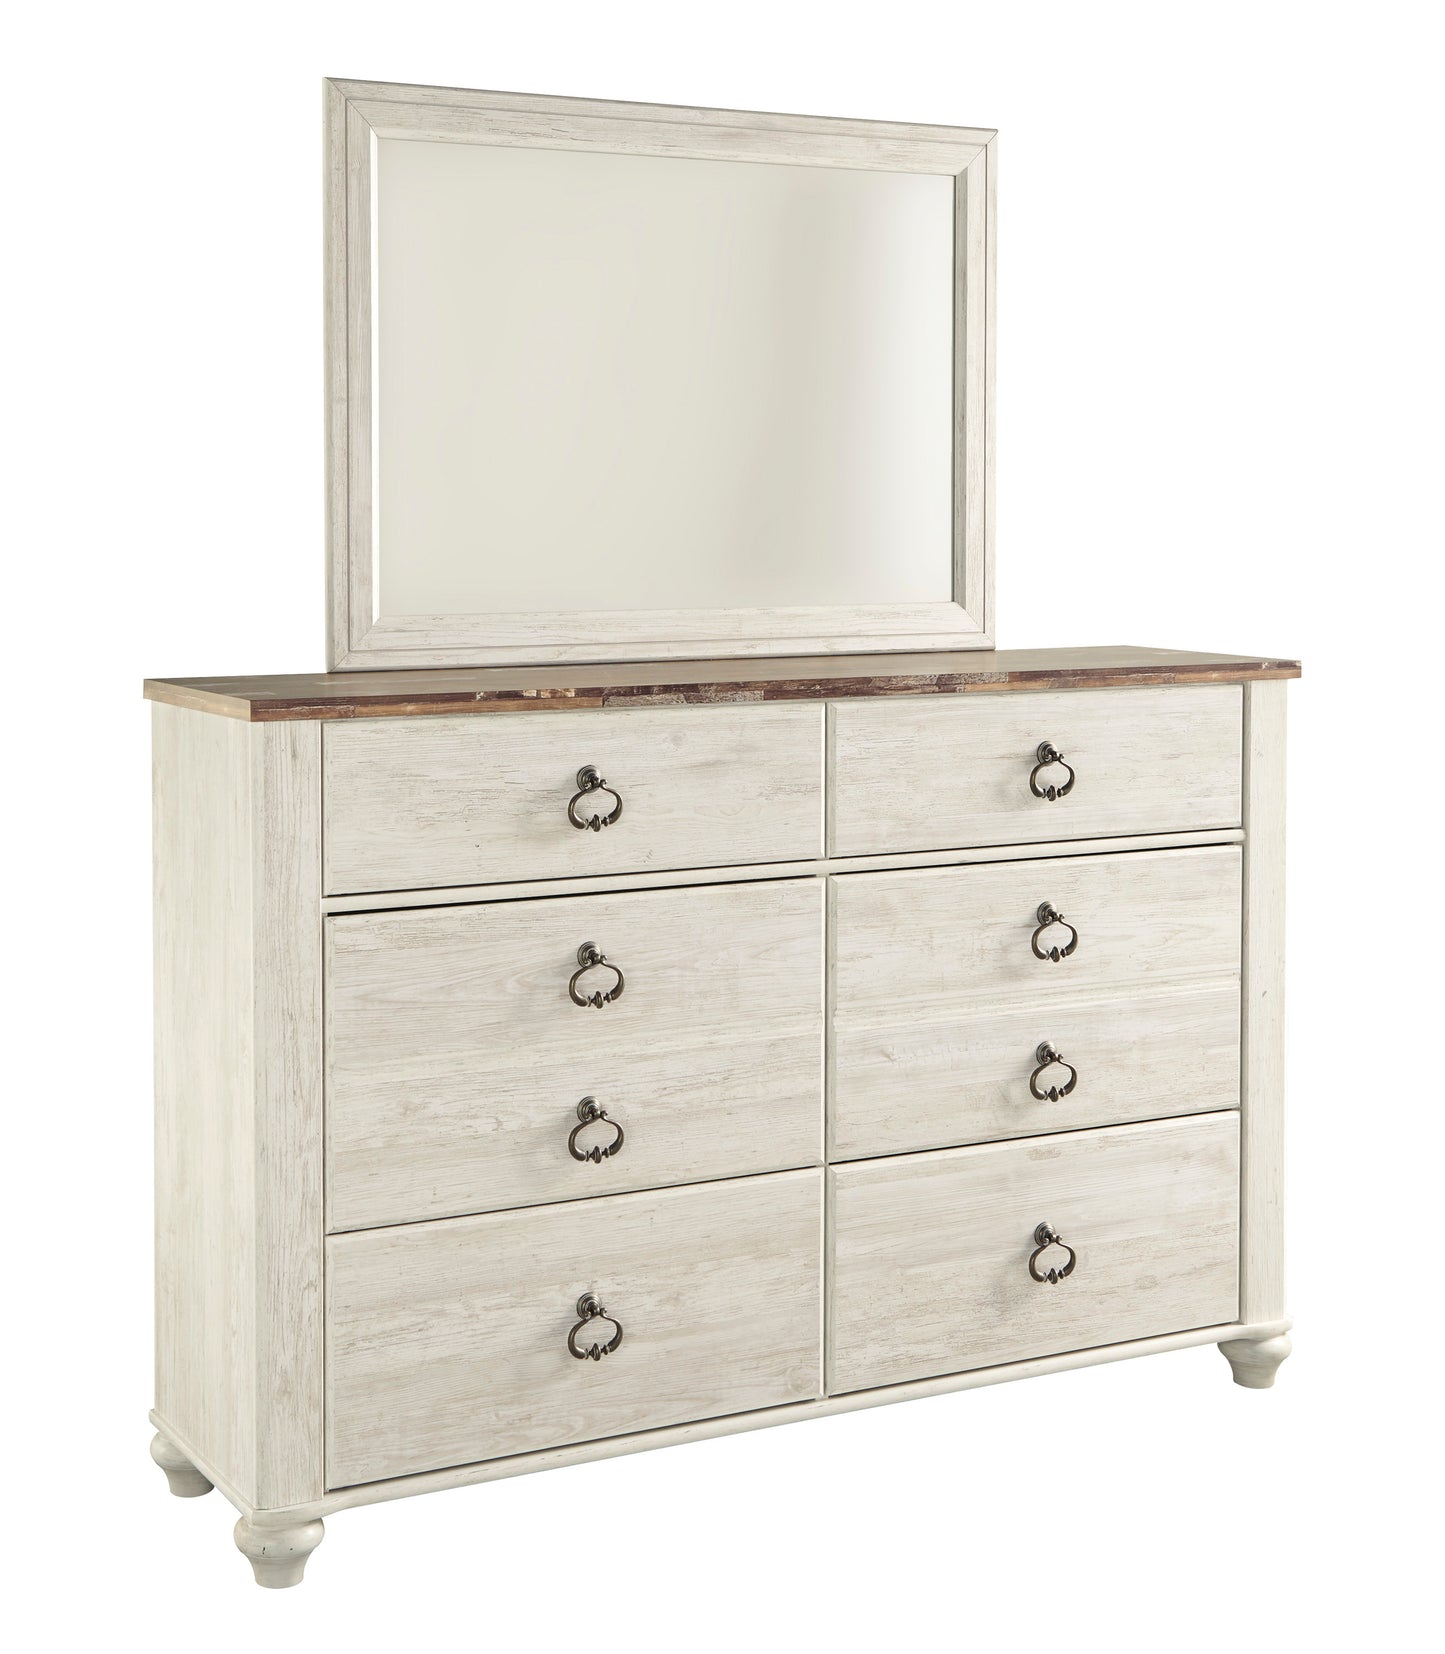 Ashley Willowton 5PC Queen Sleigh Bedroom Set with Two Nightstand in White